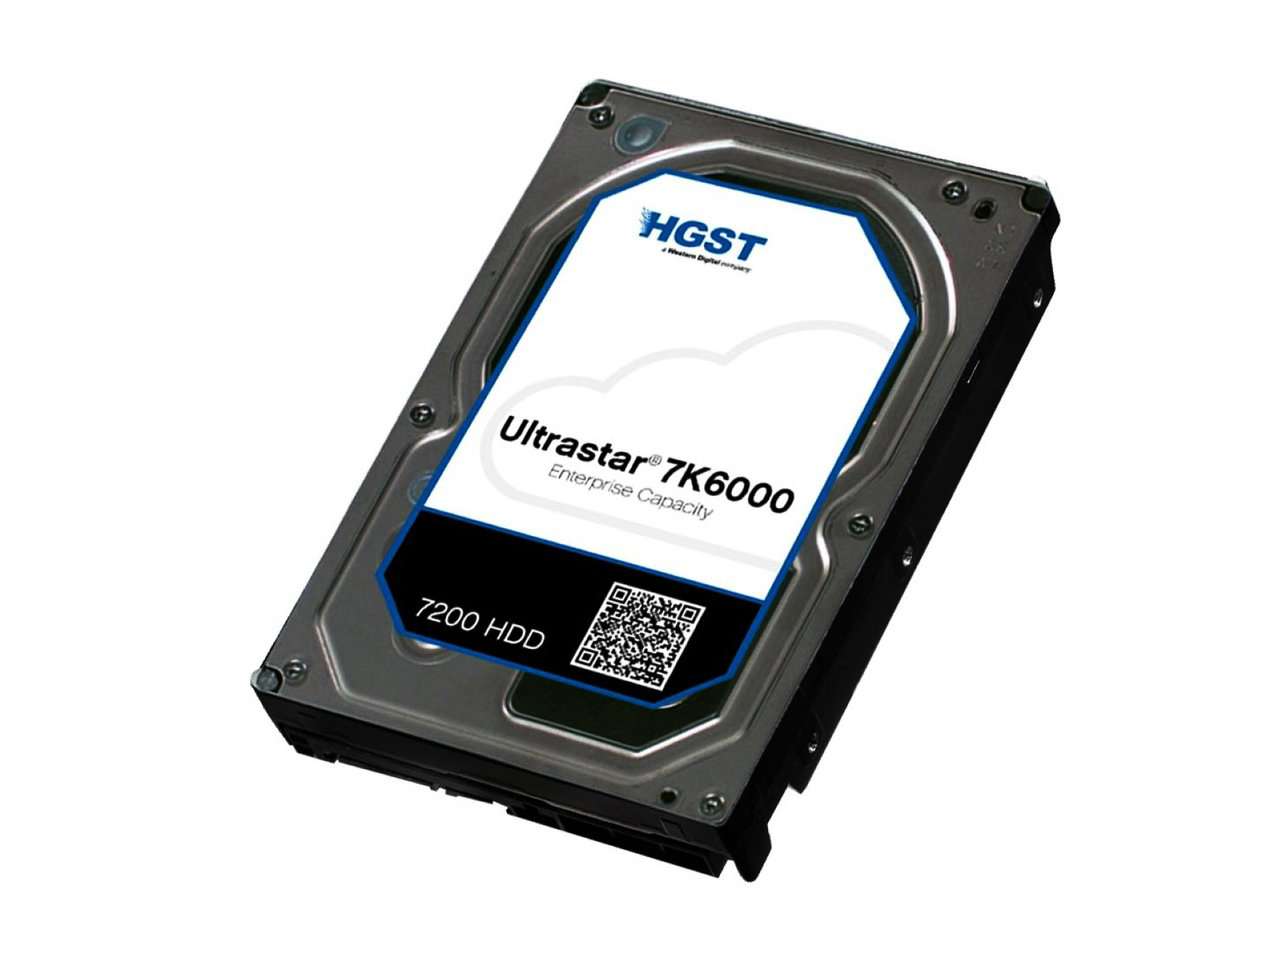 HGST Ultrastar 7K6000 0F22798  HUS726020AL4210 2TB 7.2K RPM SAS 12Gb/s 4Kn 128MB Cache 3.5" ISE HDD